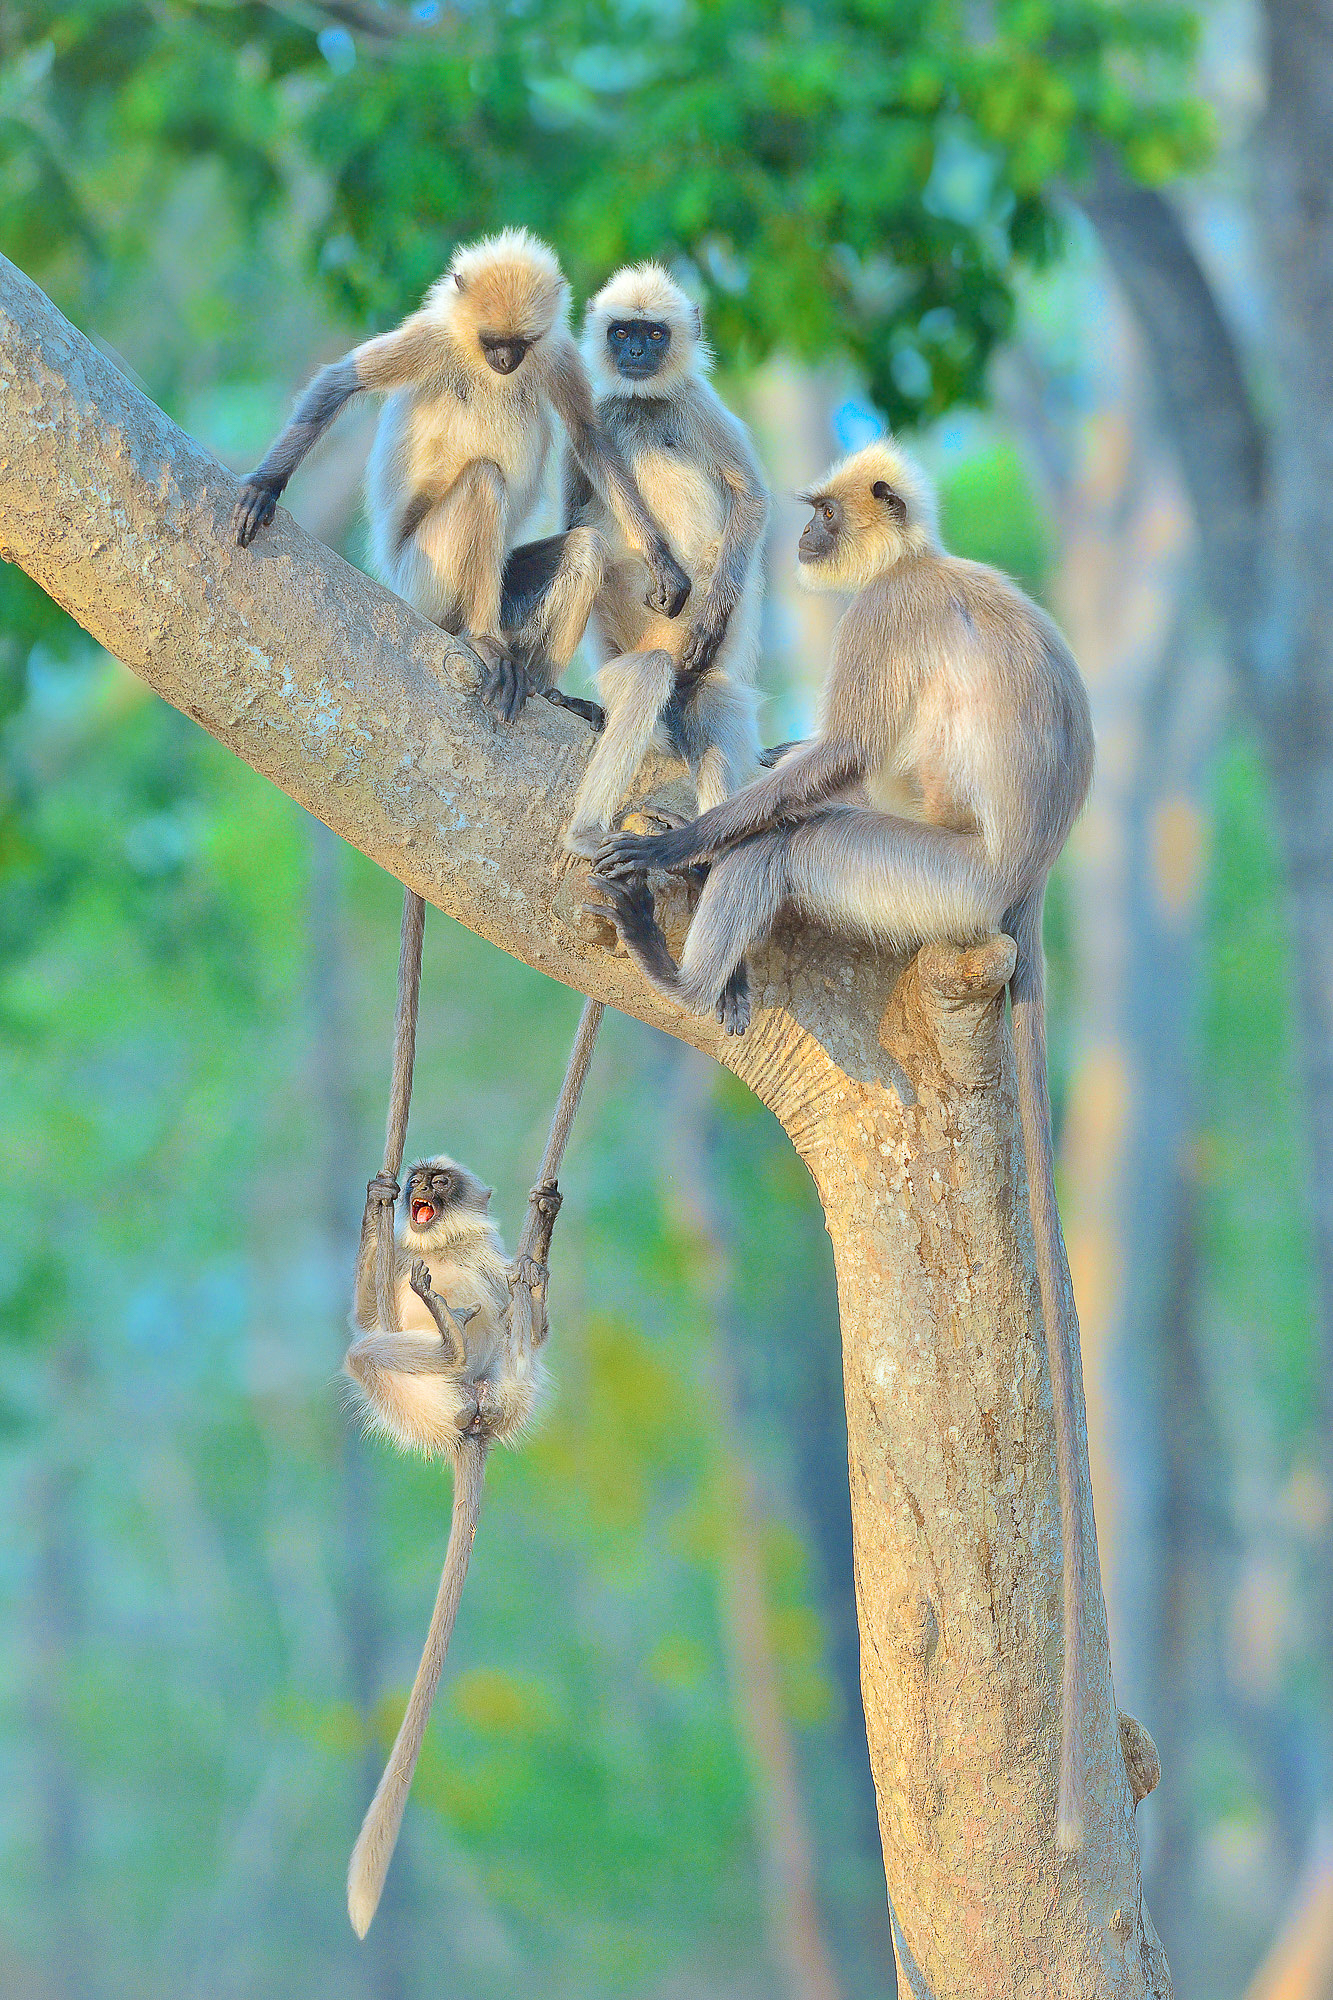 A group of grey langurs